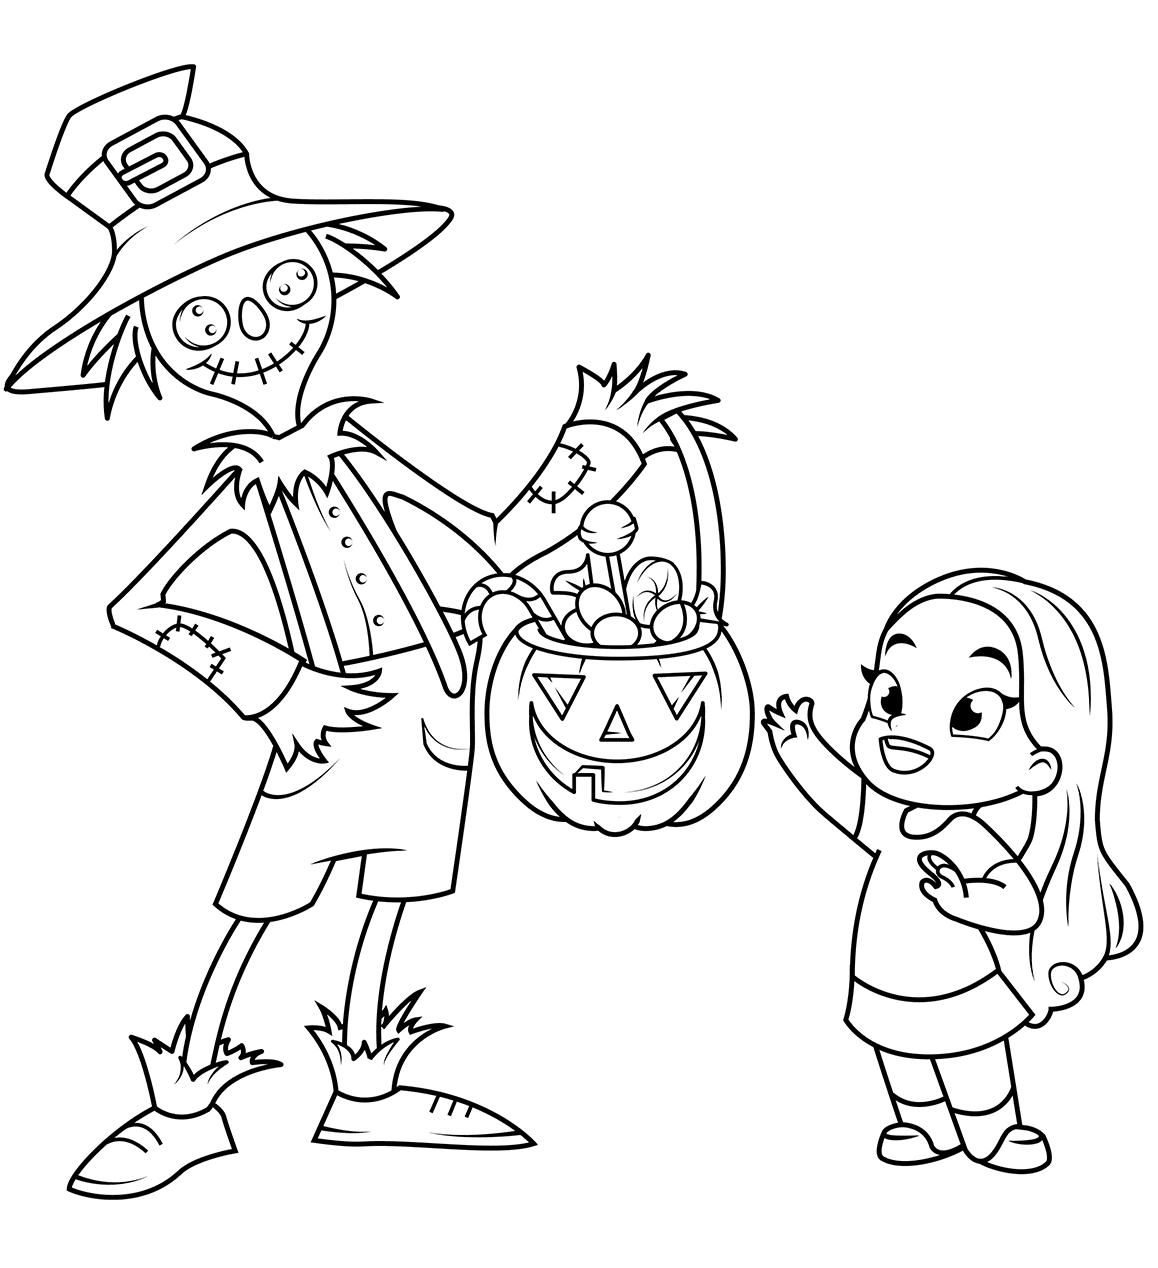 Scarecrow Treats A Little Girl With Sweets Halloween Coloring Page